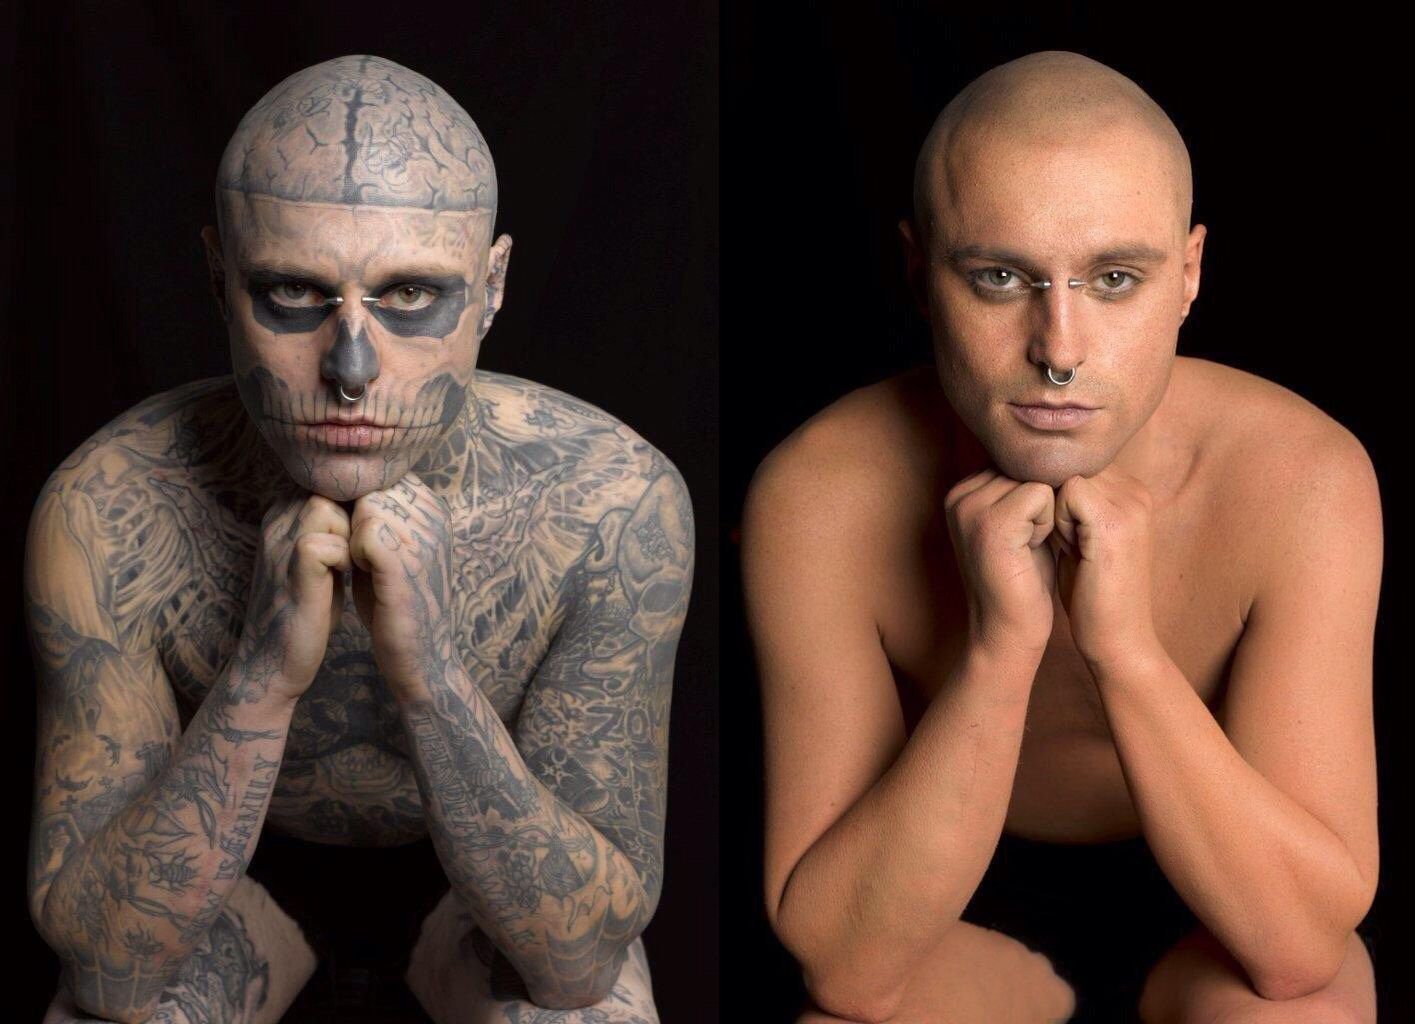 The 4 most tattooed people in the world